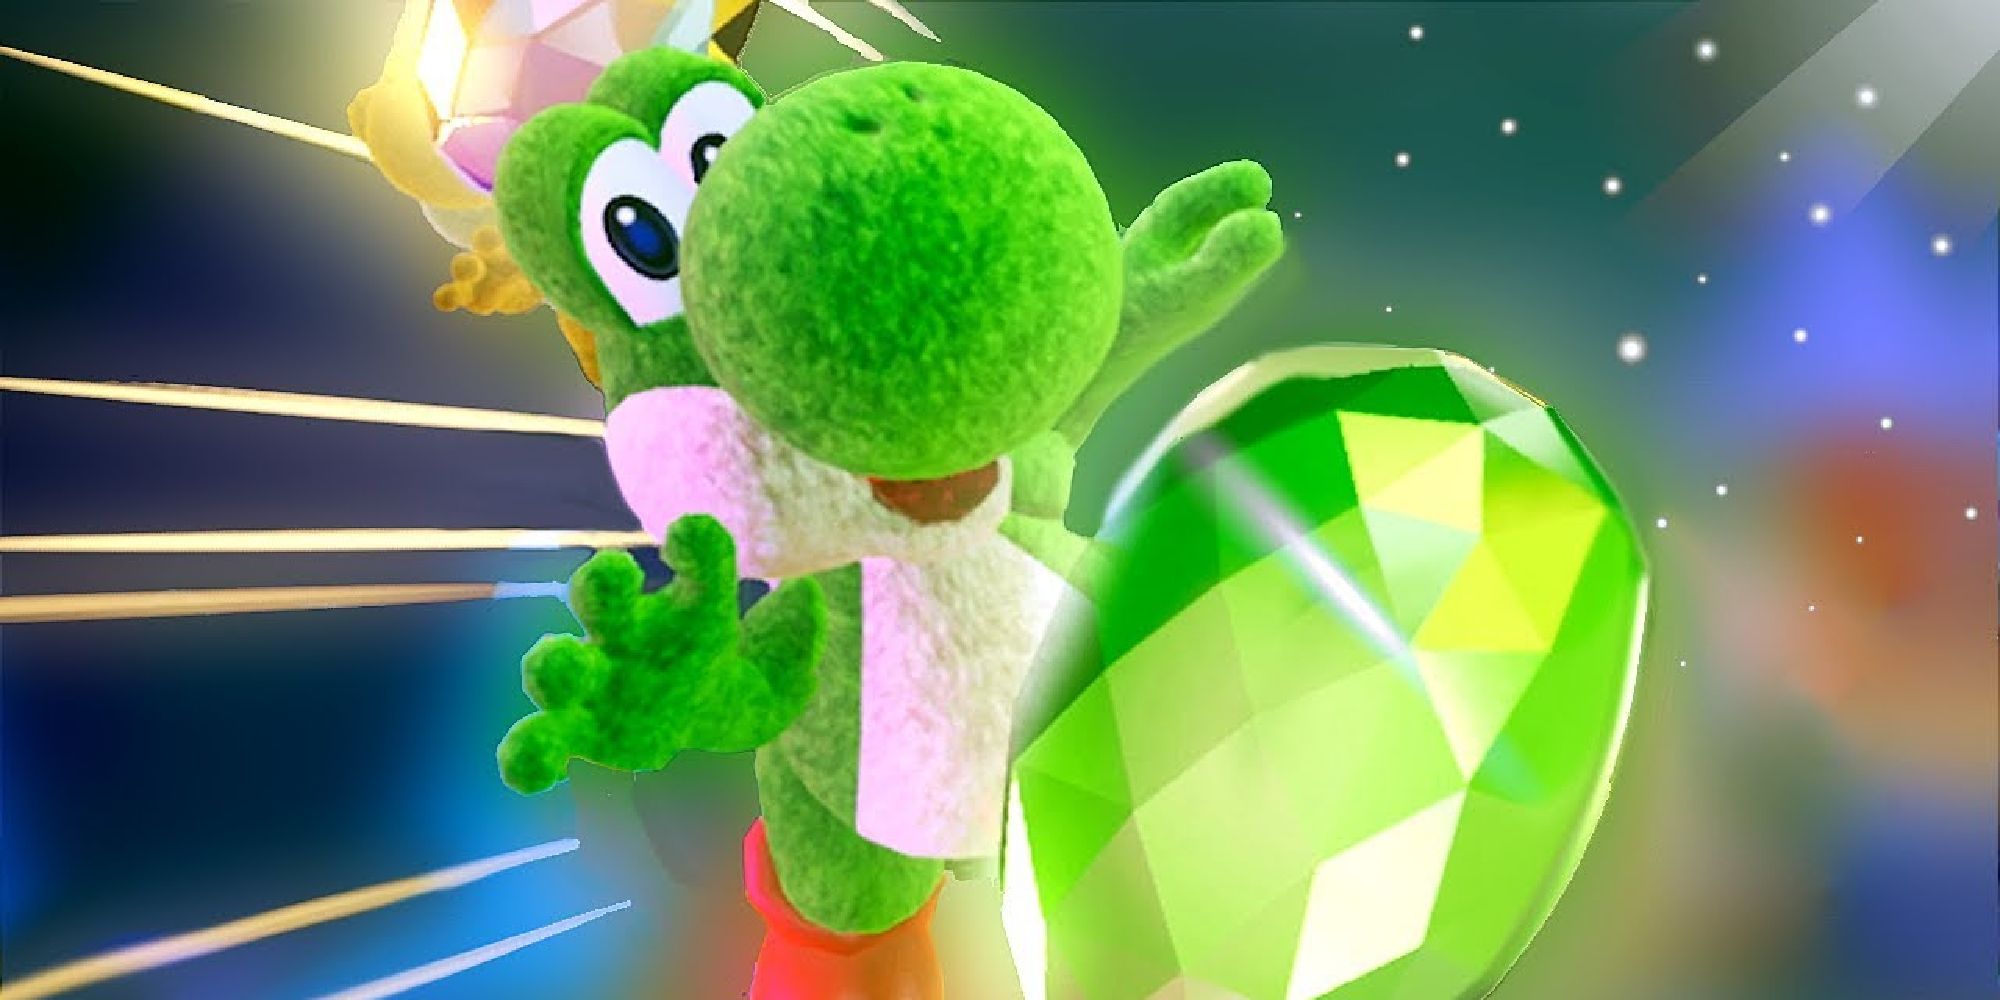 Yoshi posing with a green gem in Yoshi's Crafted World